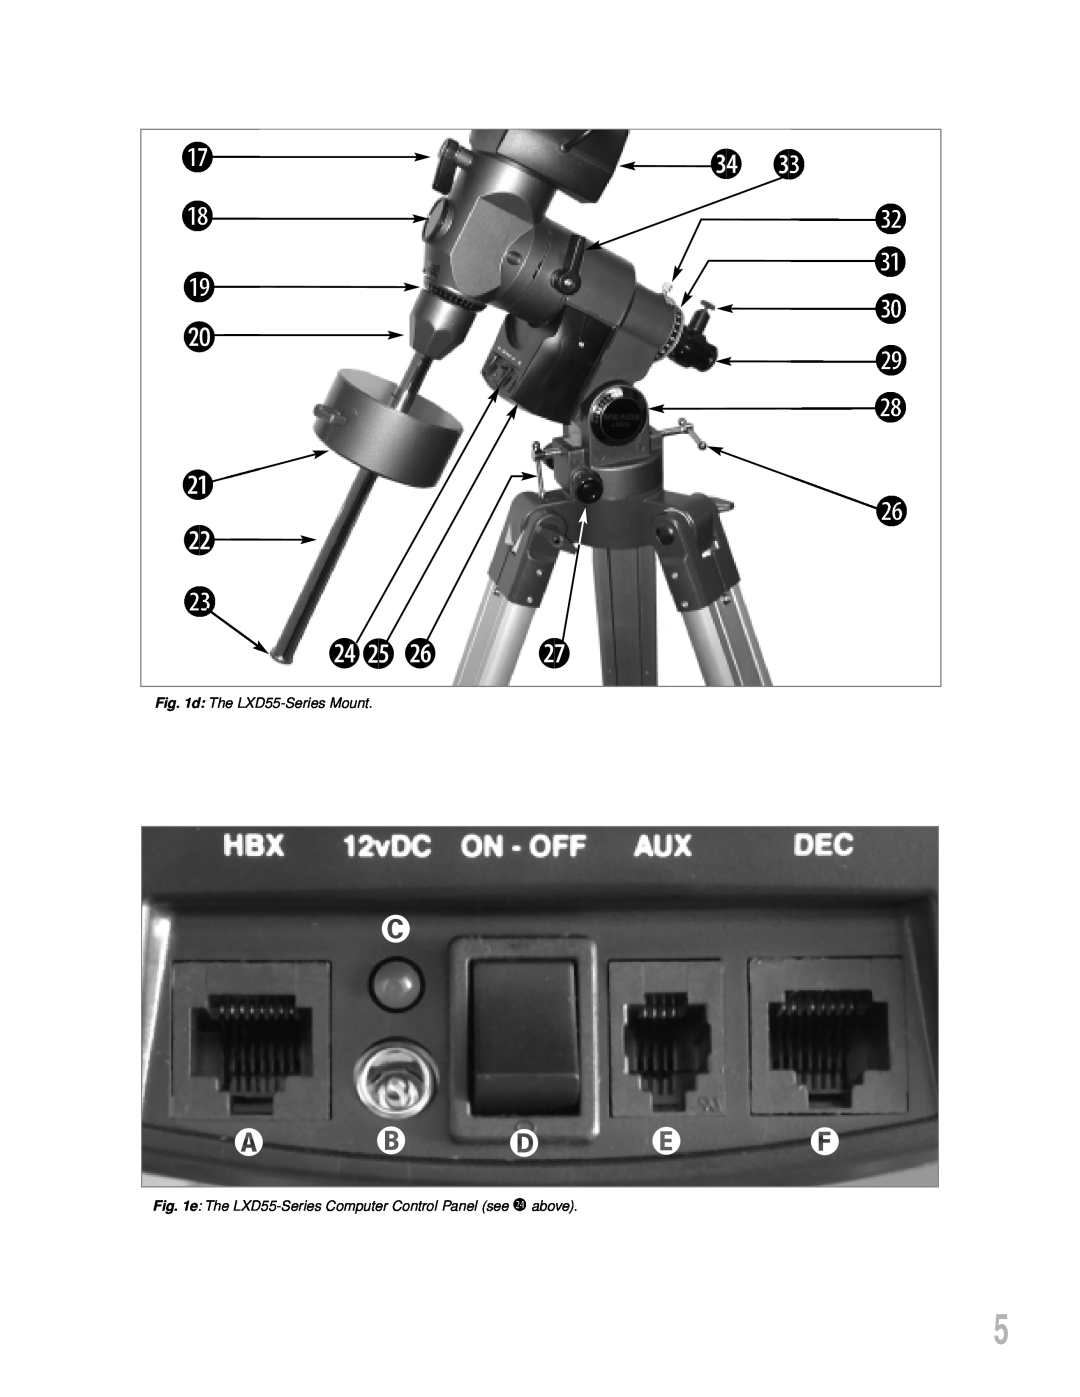 Meade instruction manual 2$2%, d The LXD55-Series Mount, e The LXD55-Series Computer Control Panel see 2$ above 